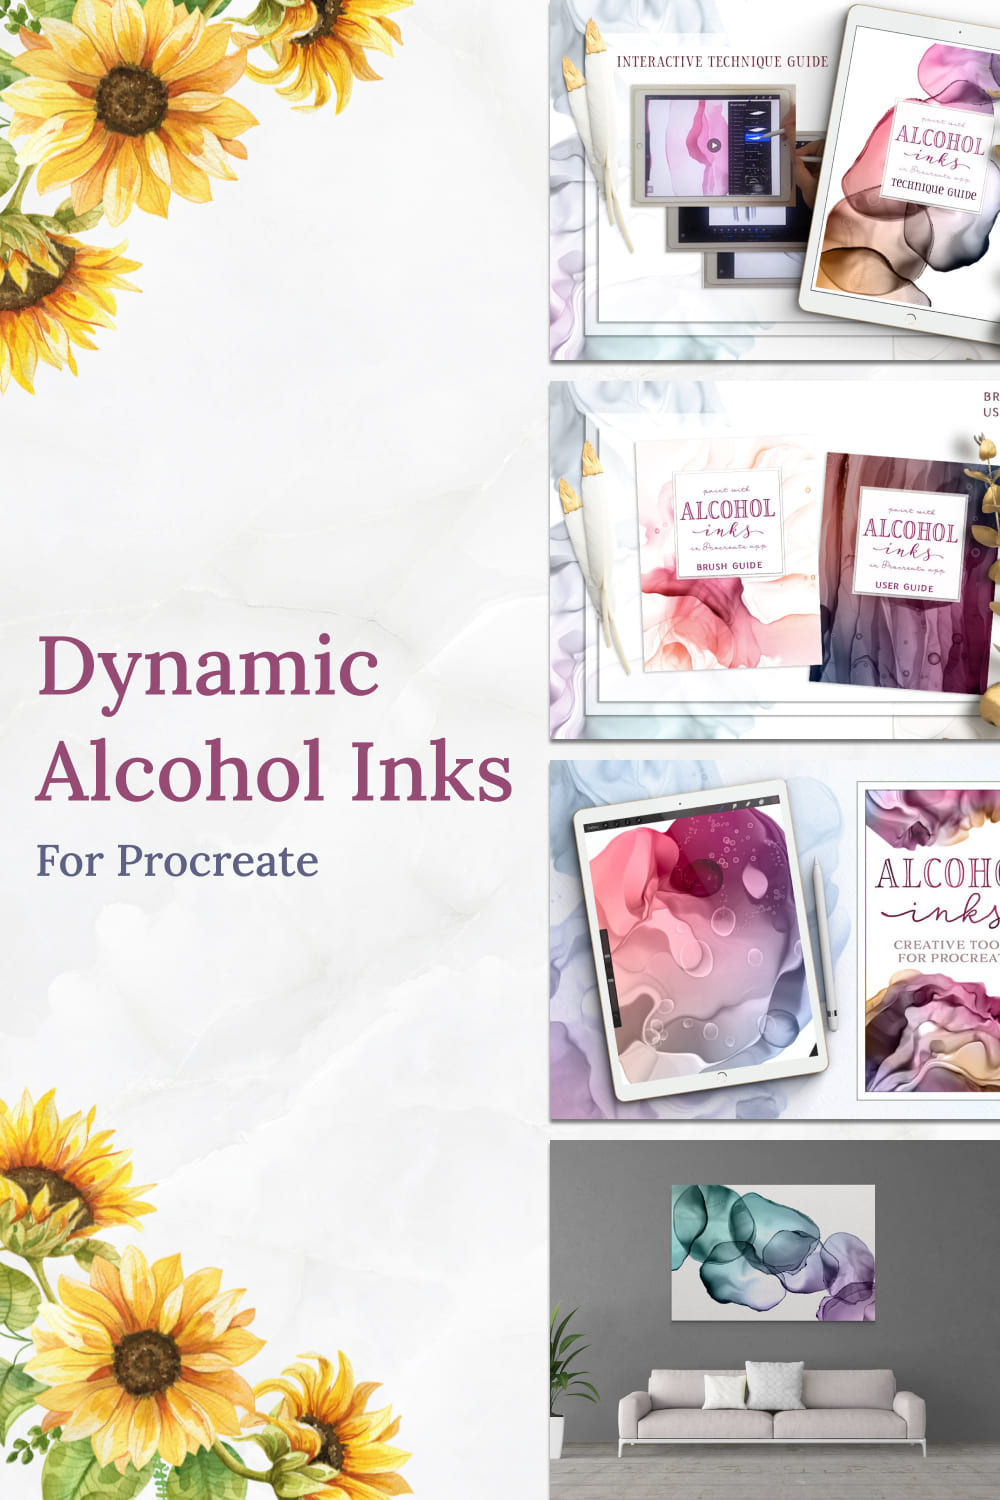 Dynamic Alcohol Inks for Procreate - pinterest image preview.